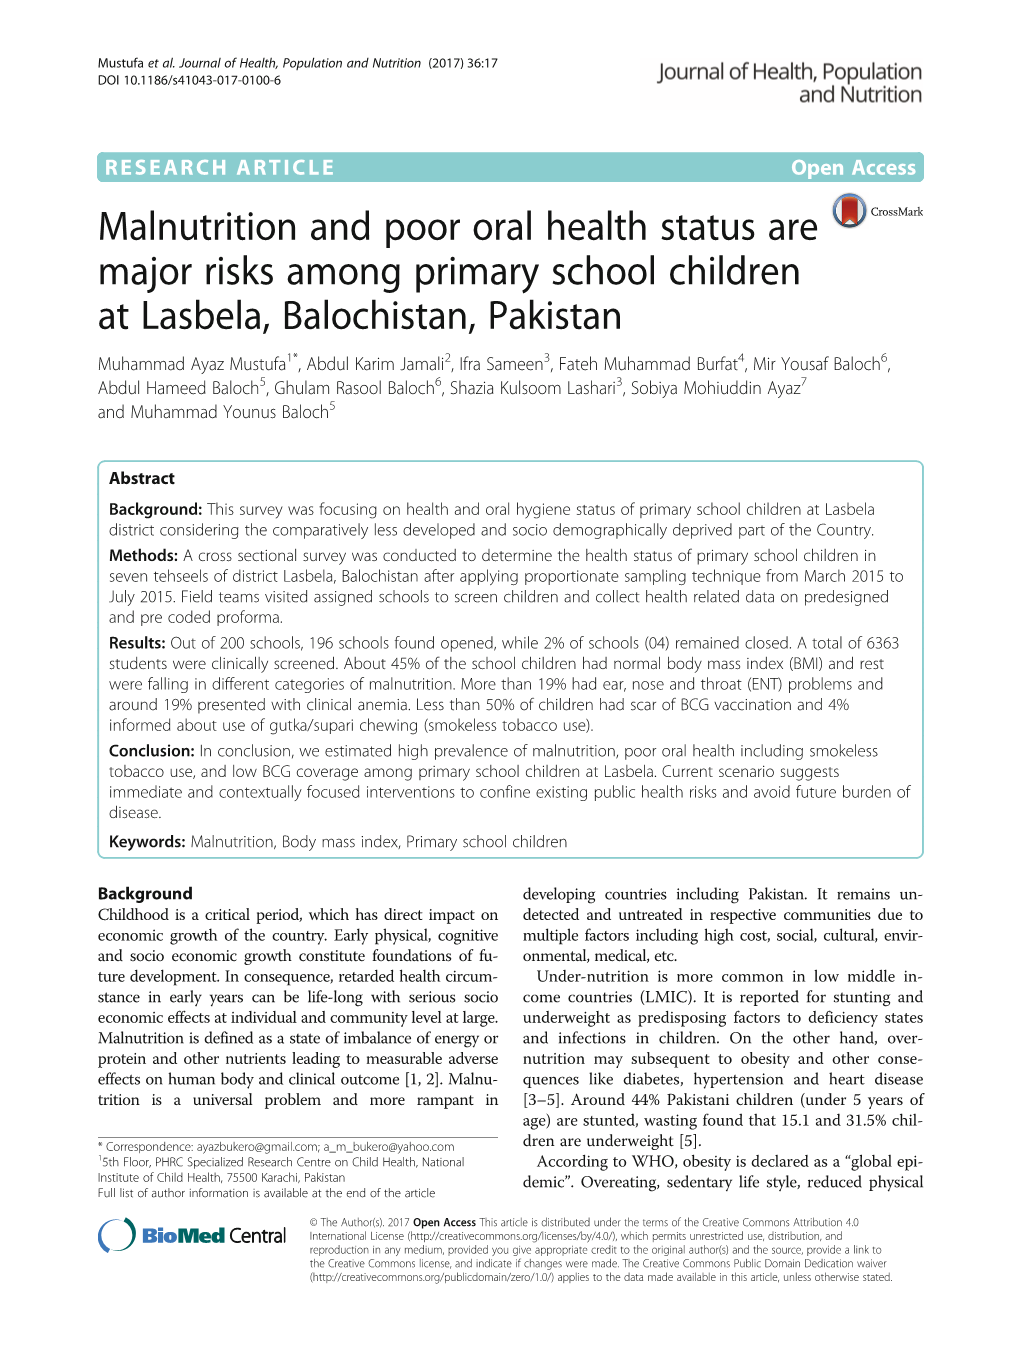 Malnutrition and Poor Oral Health Status Are Major Risks Among